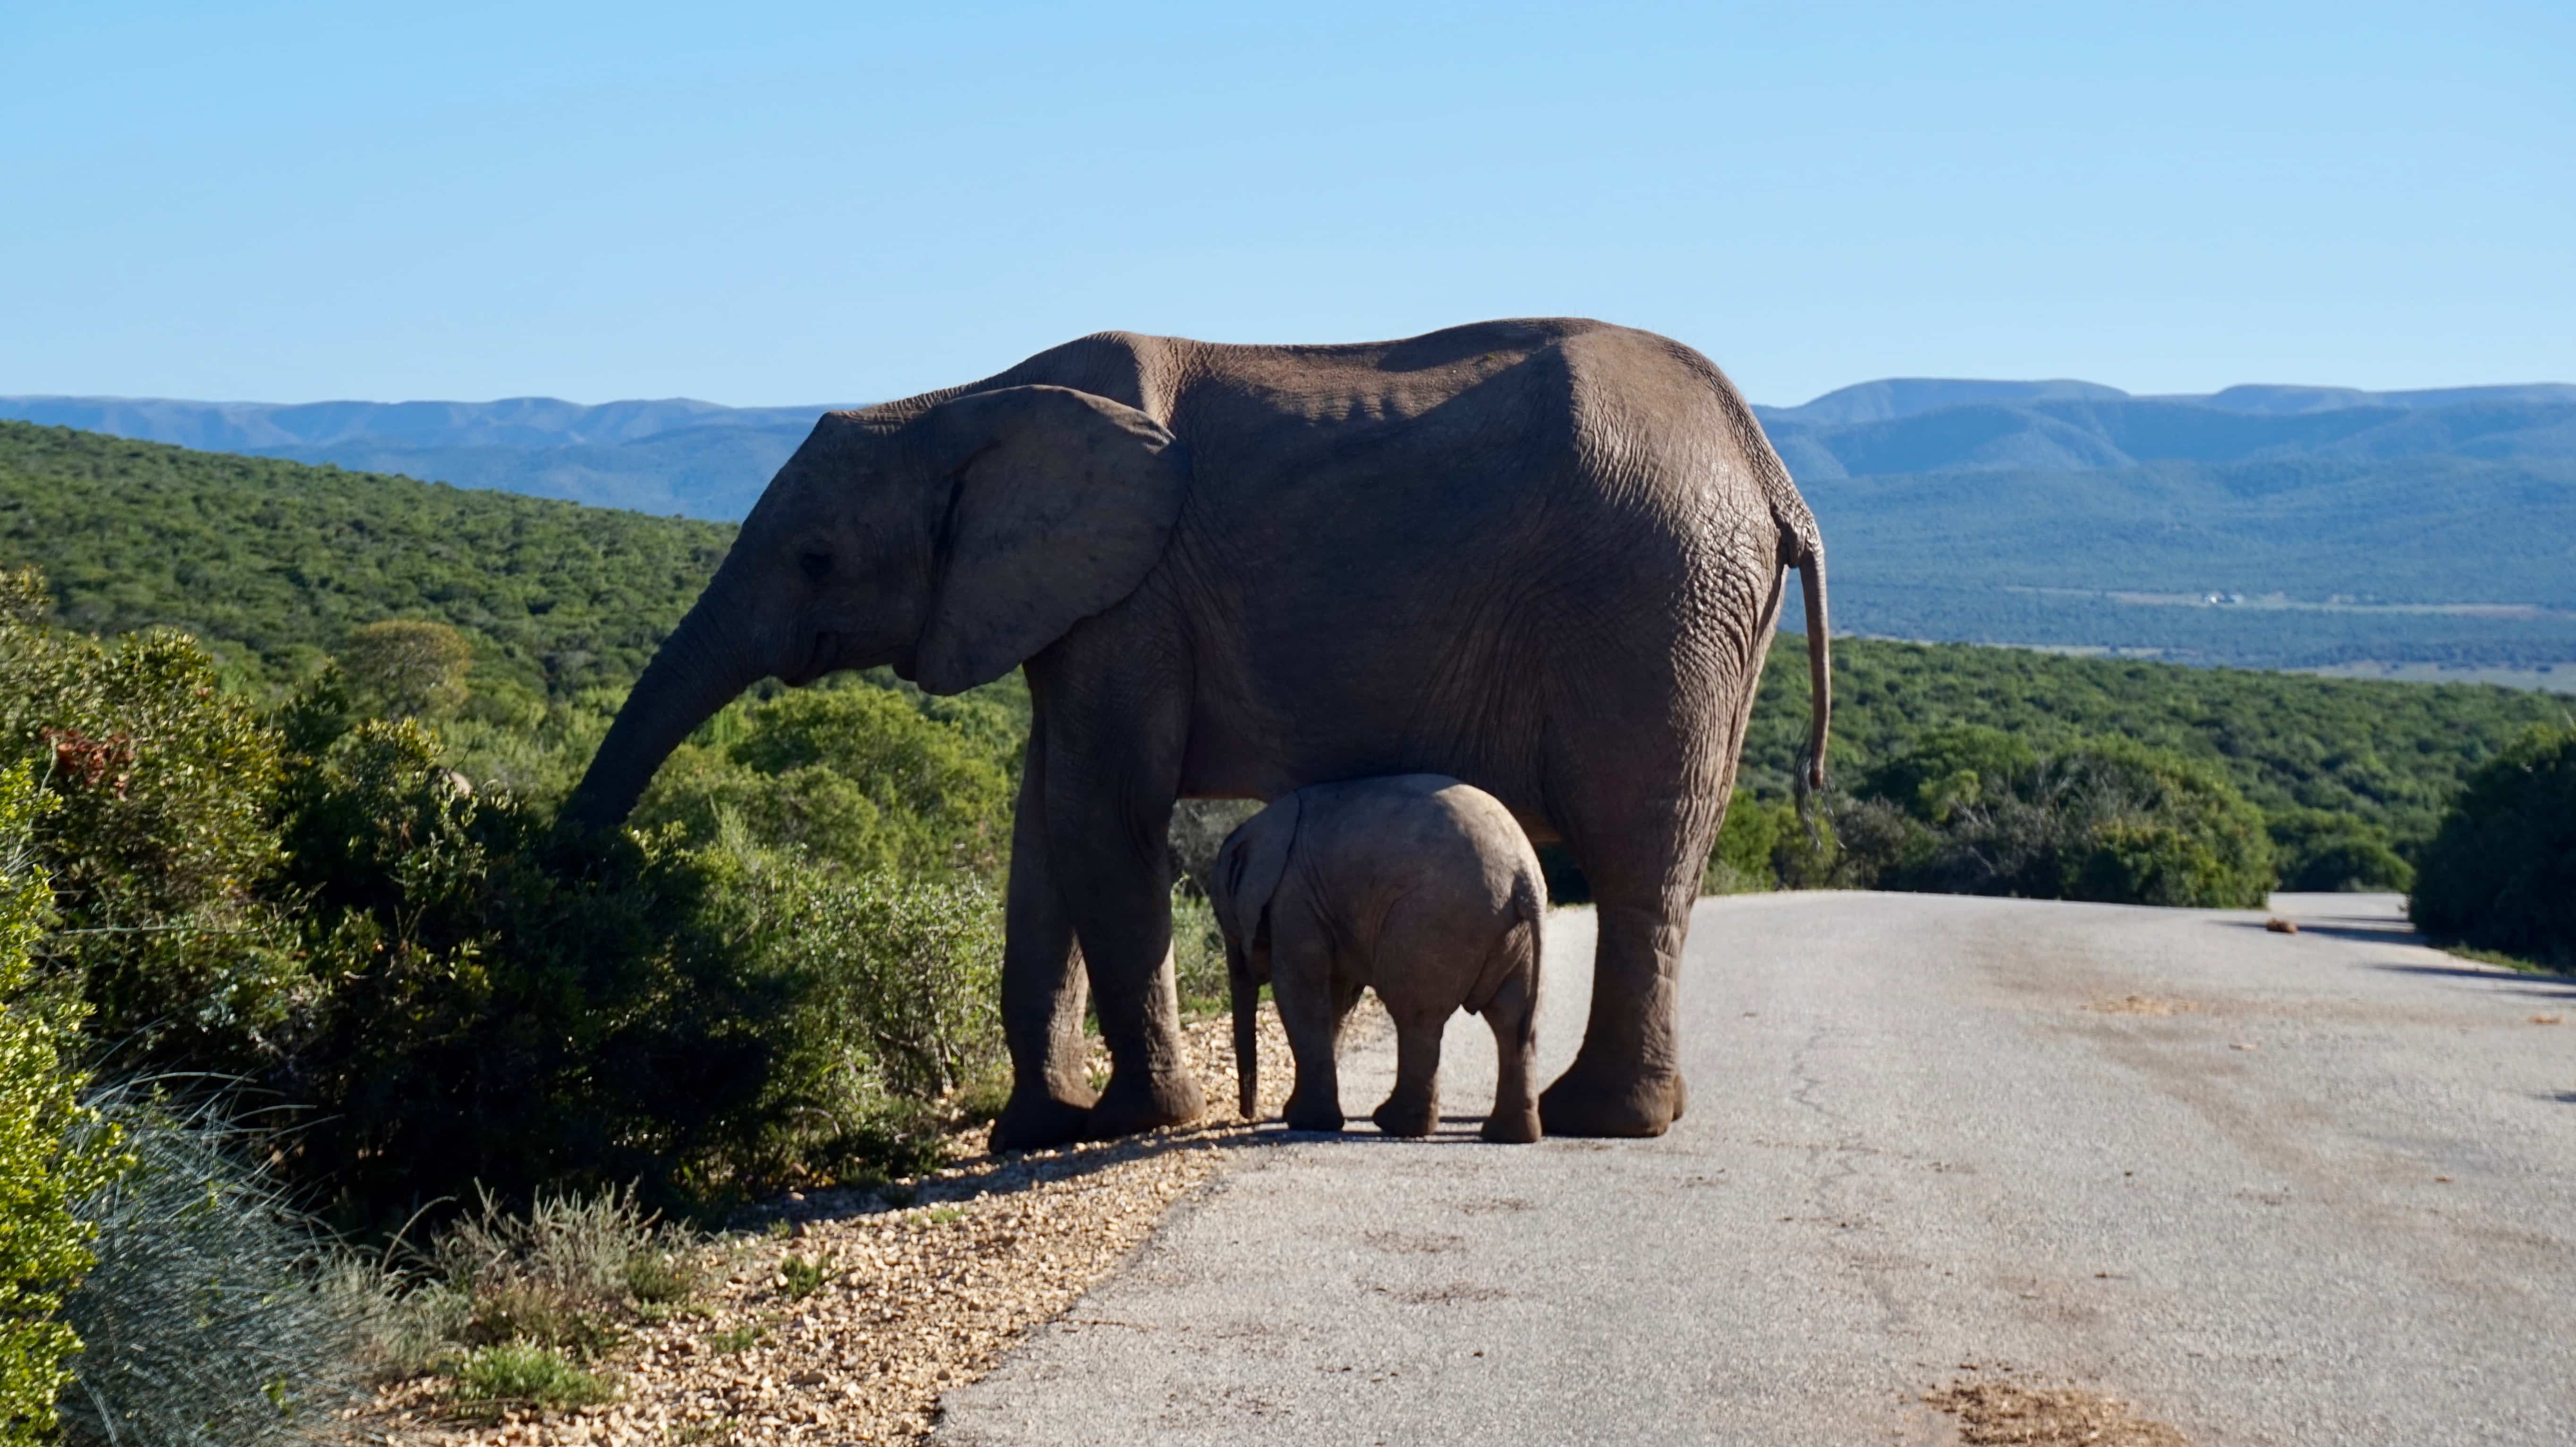 Mother and baby elephant on the road at Addo Elephant National Park